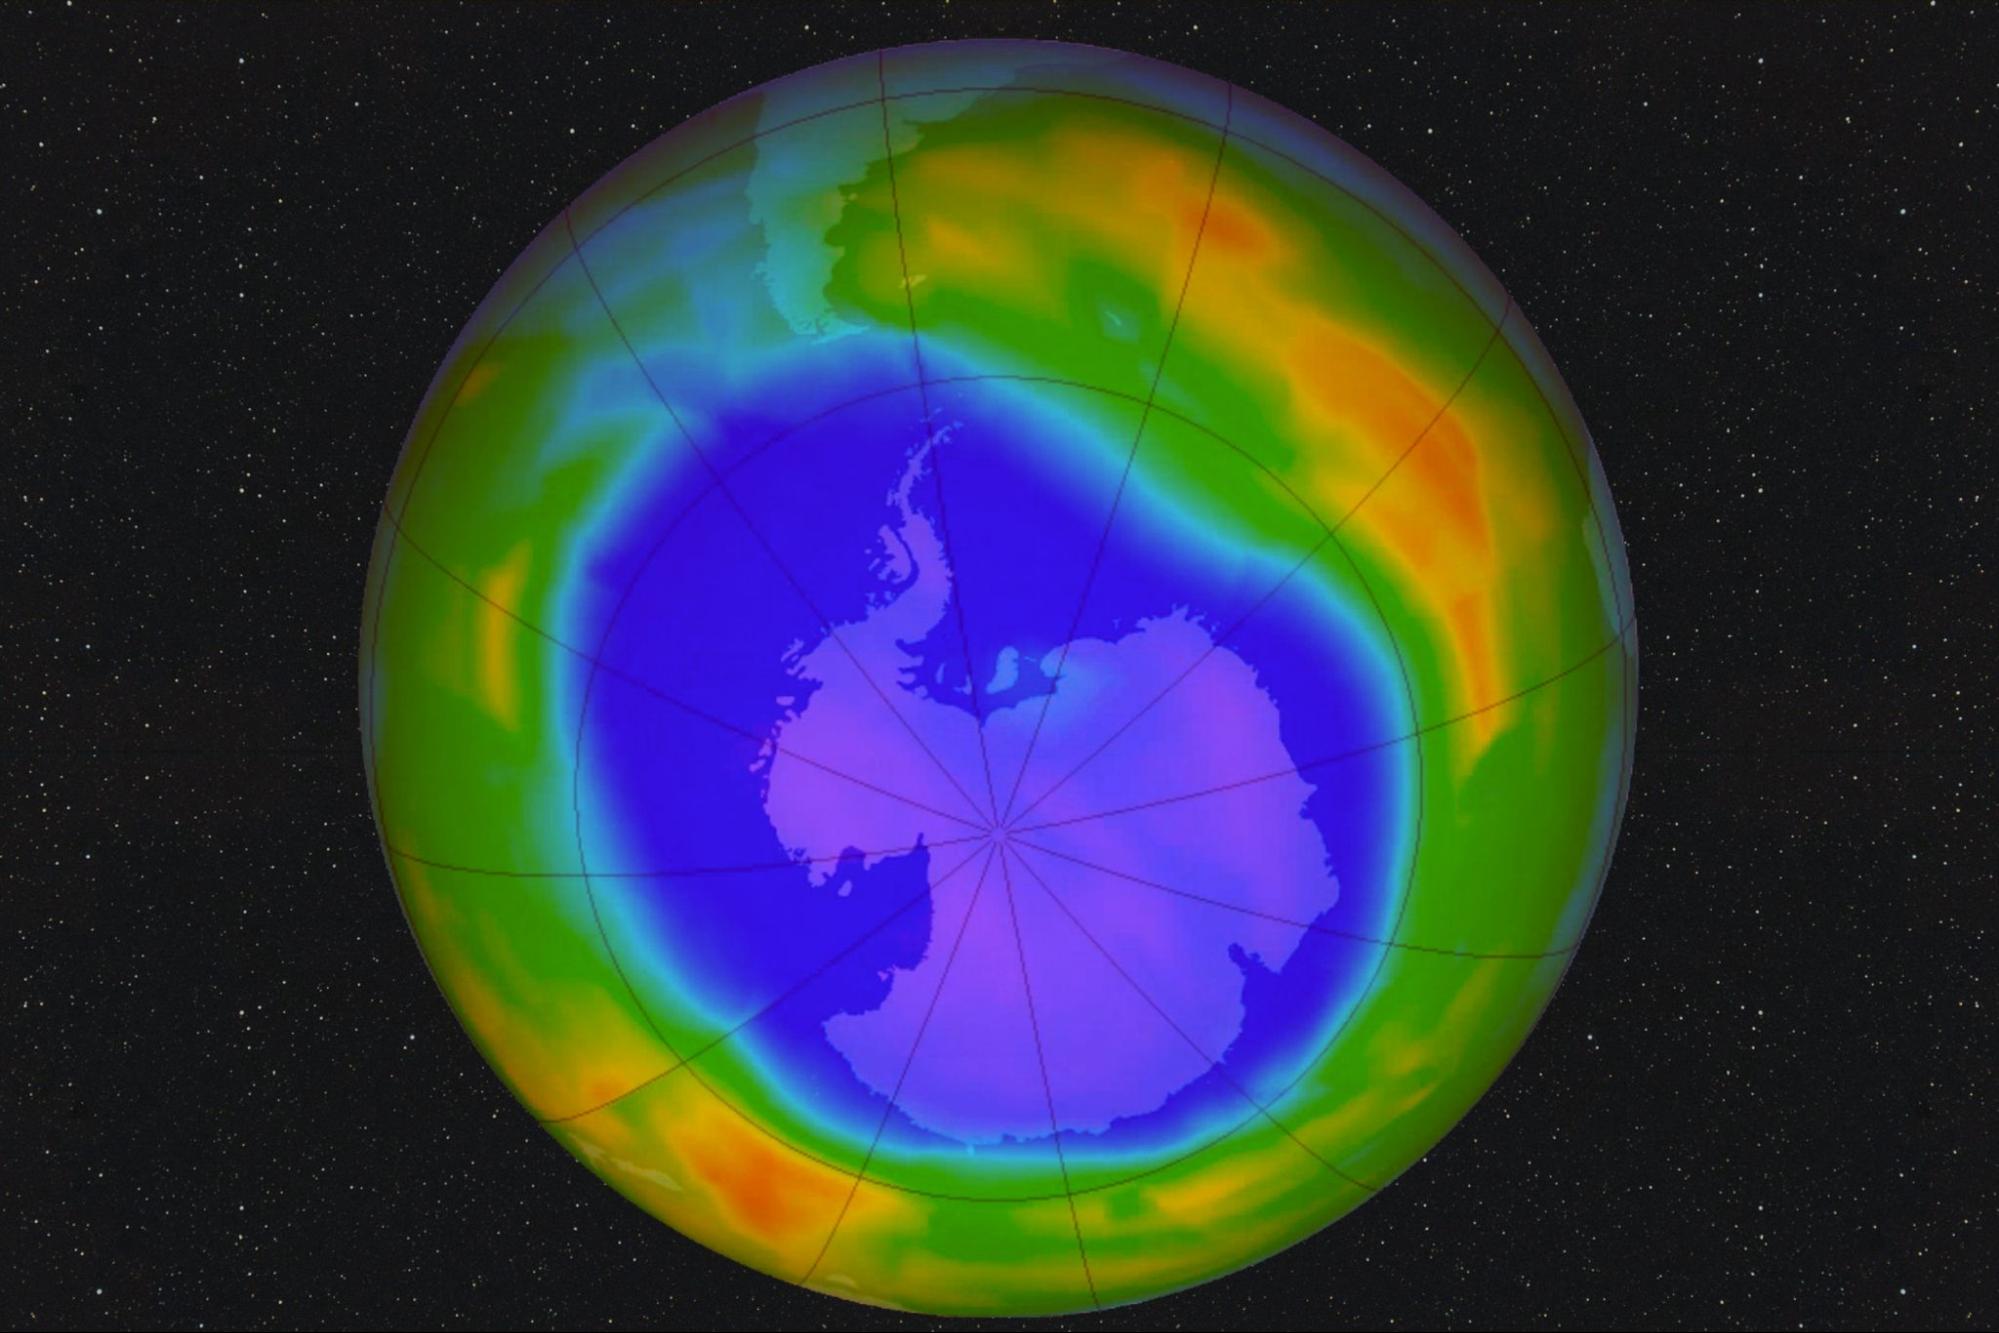 Saving the Ozone Layer Prevented Even More Intense Global Warming